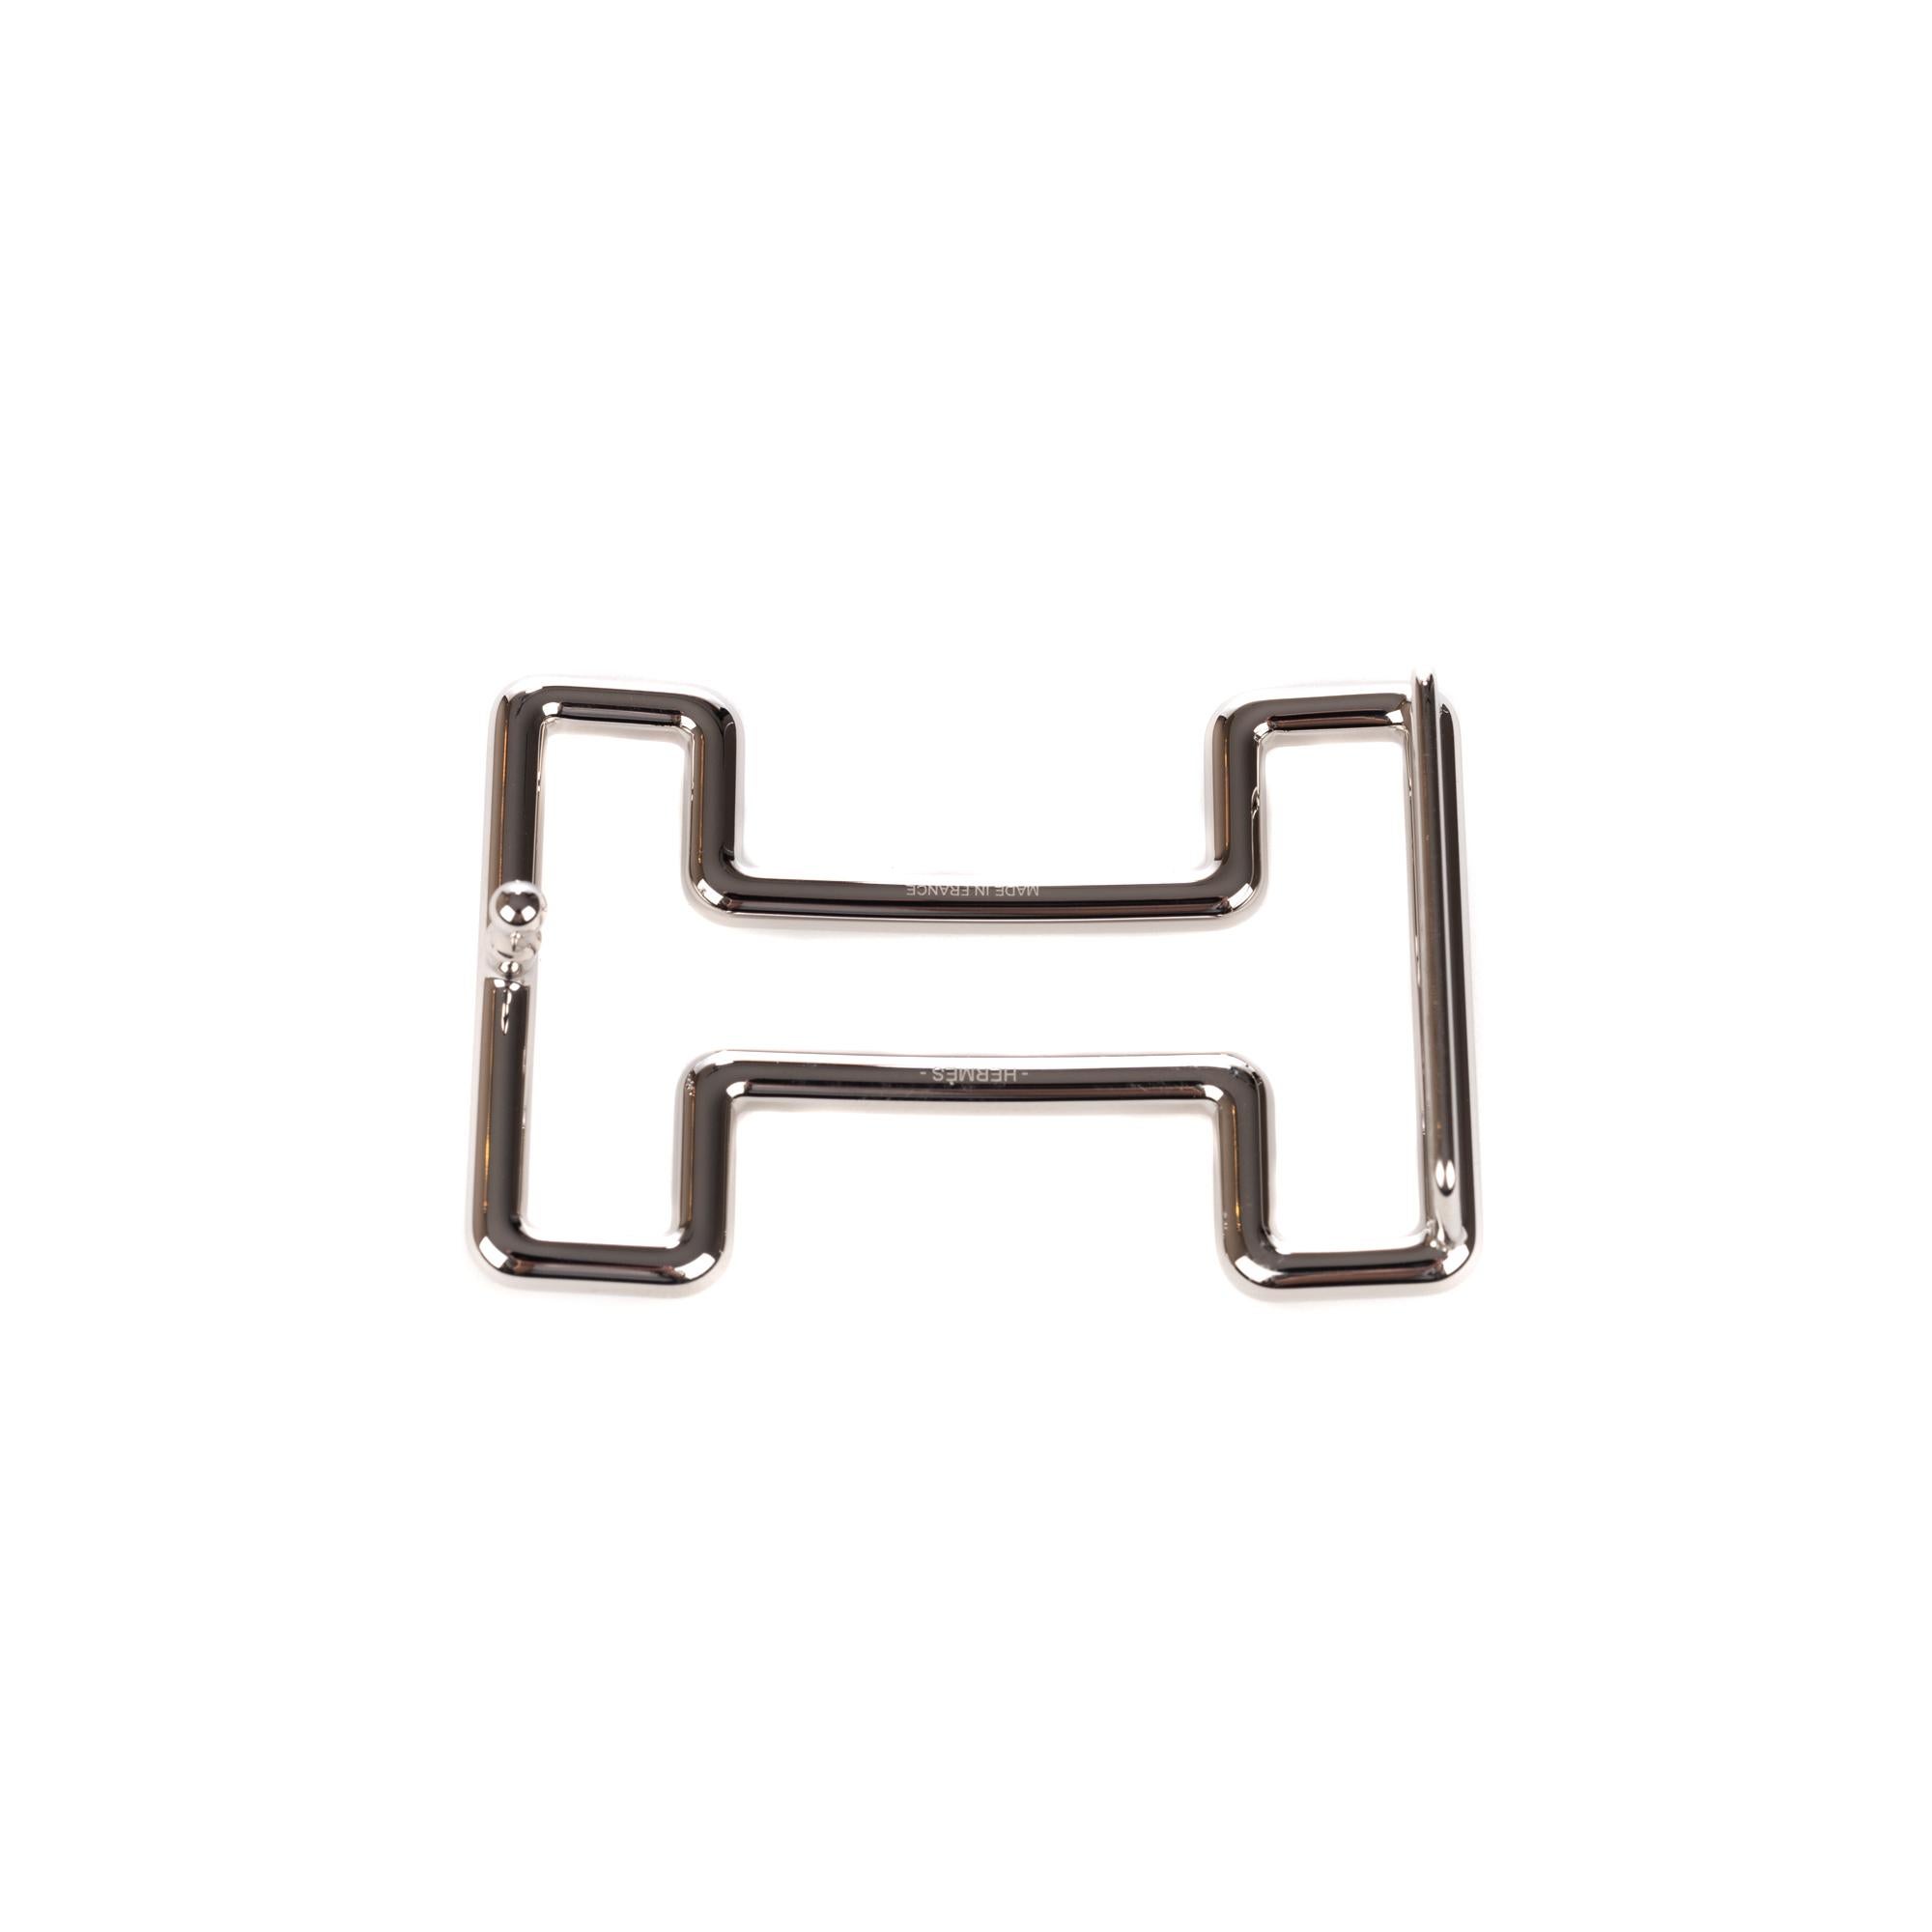 Type: Belt Buckle
Marque: Hermès
Modèle: Tonight
Material : Steel
Color : Silvery
Signature: HERMES 
Shape : H
For a leather of 3.2 cm.
Dimensions : H: 3.7 x L: 6 x P: 1.4 cm
Pristine condition - Never worn - Comes with dustbag